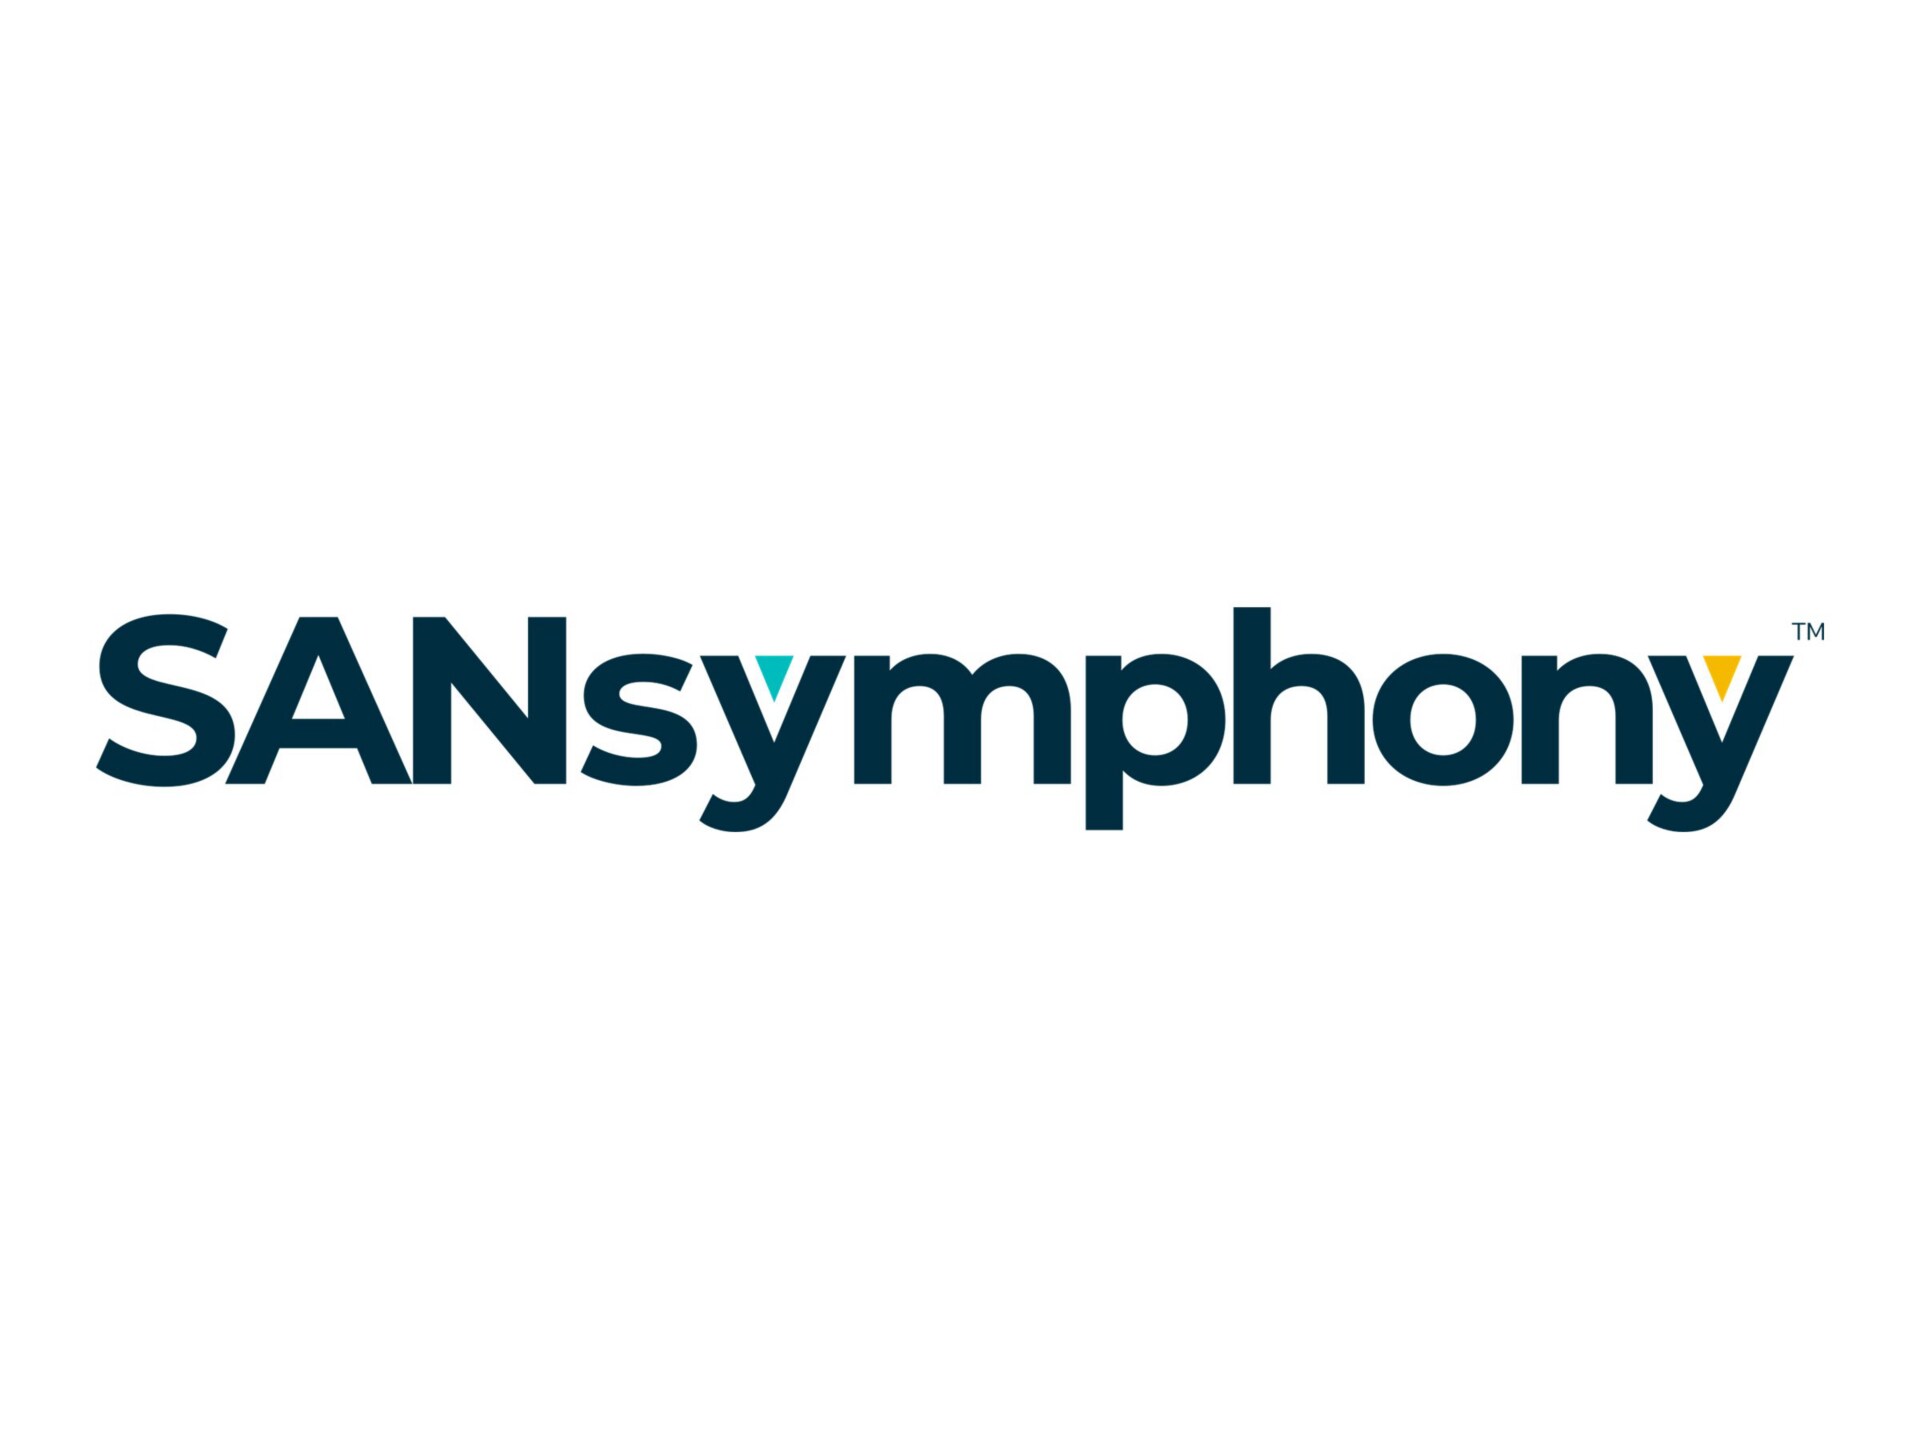 SANsymphony Software-Defined Storage Standard - subscription license (3 years) - 1 TB capacity